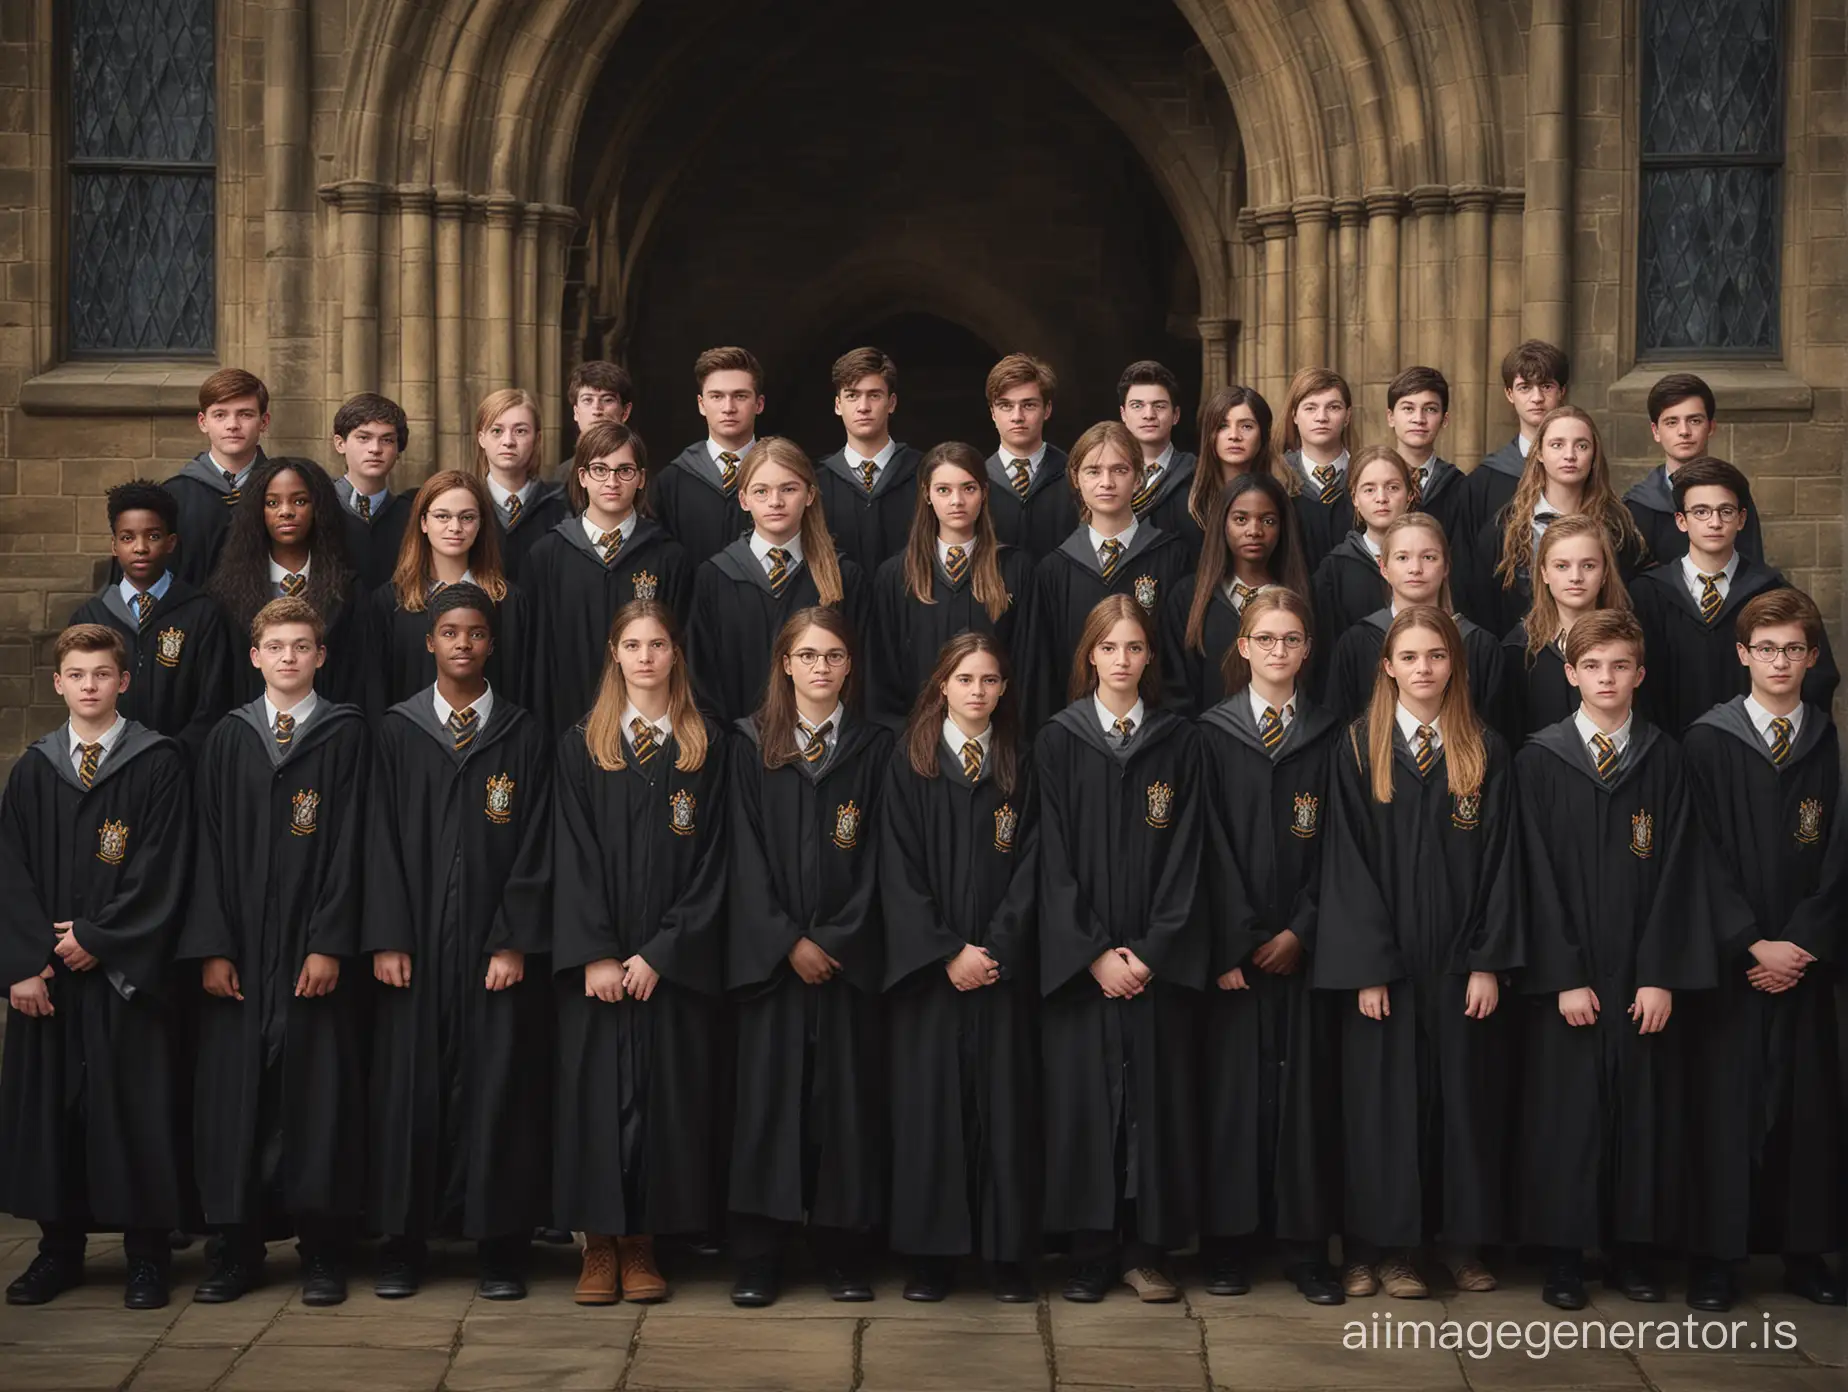 realistic class photo of 3 rows of a diverse group of teenagers in Hogwarts robes